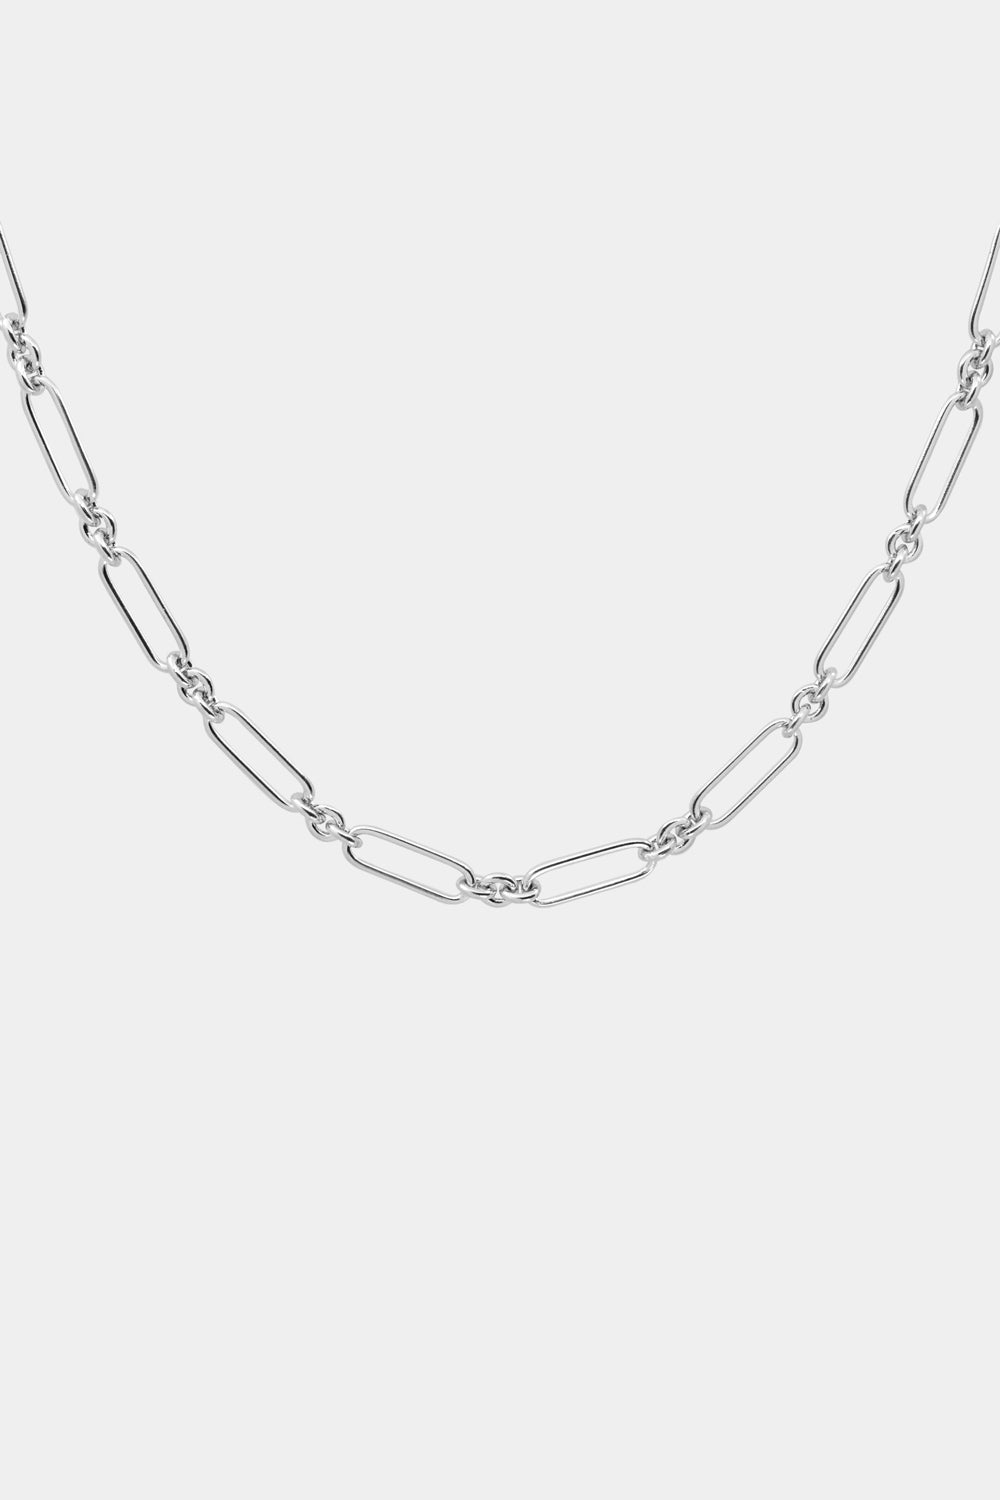 Mini Lennox Necklace | Silver or 9K White Gold, More Options Available